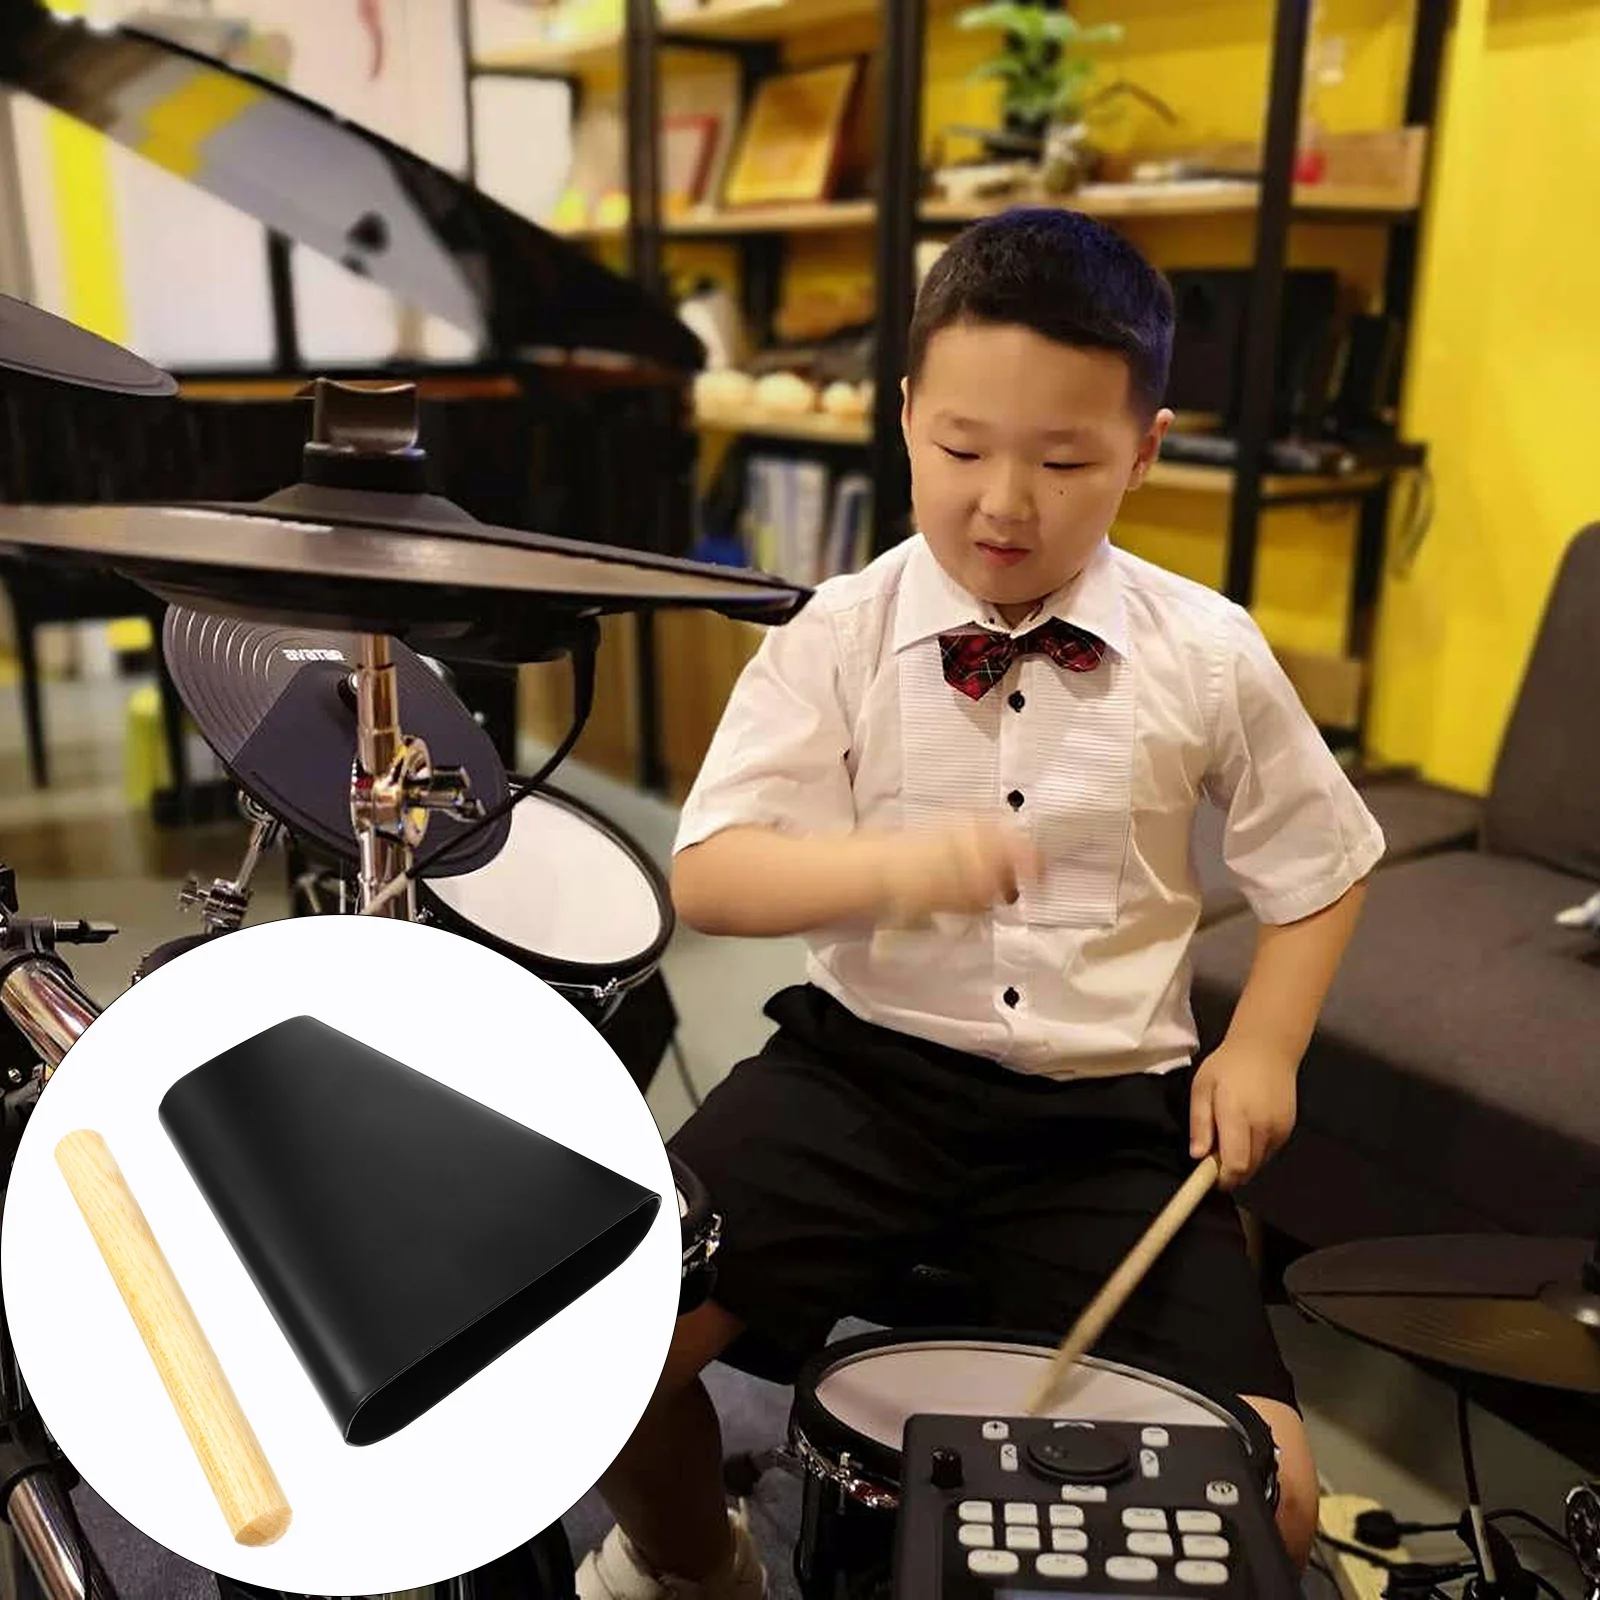 

Black Cow Bell with Beater Loud Call Bells Drum Kit Accessory for Kids Adults